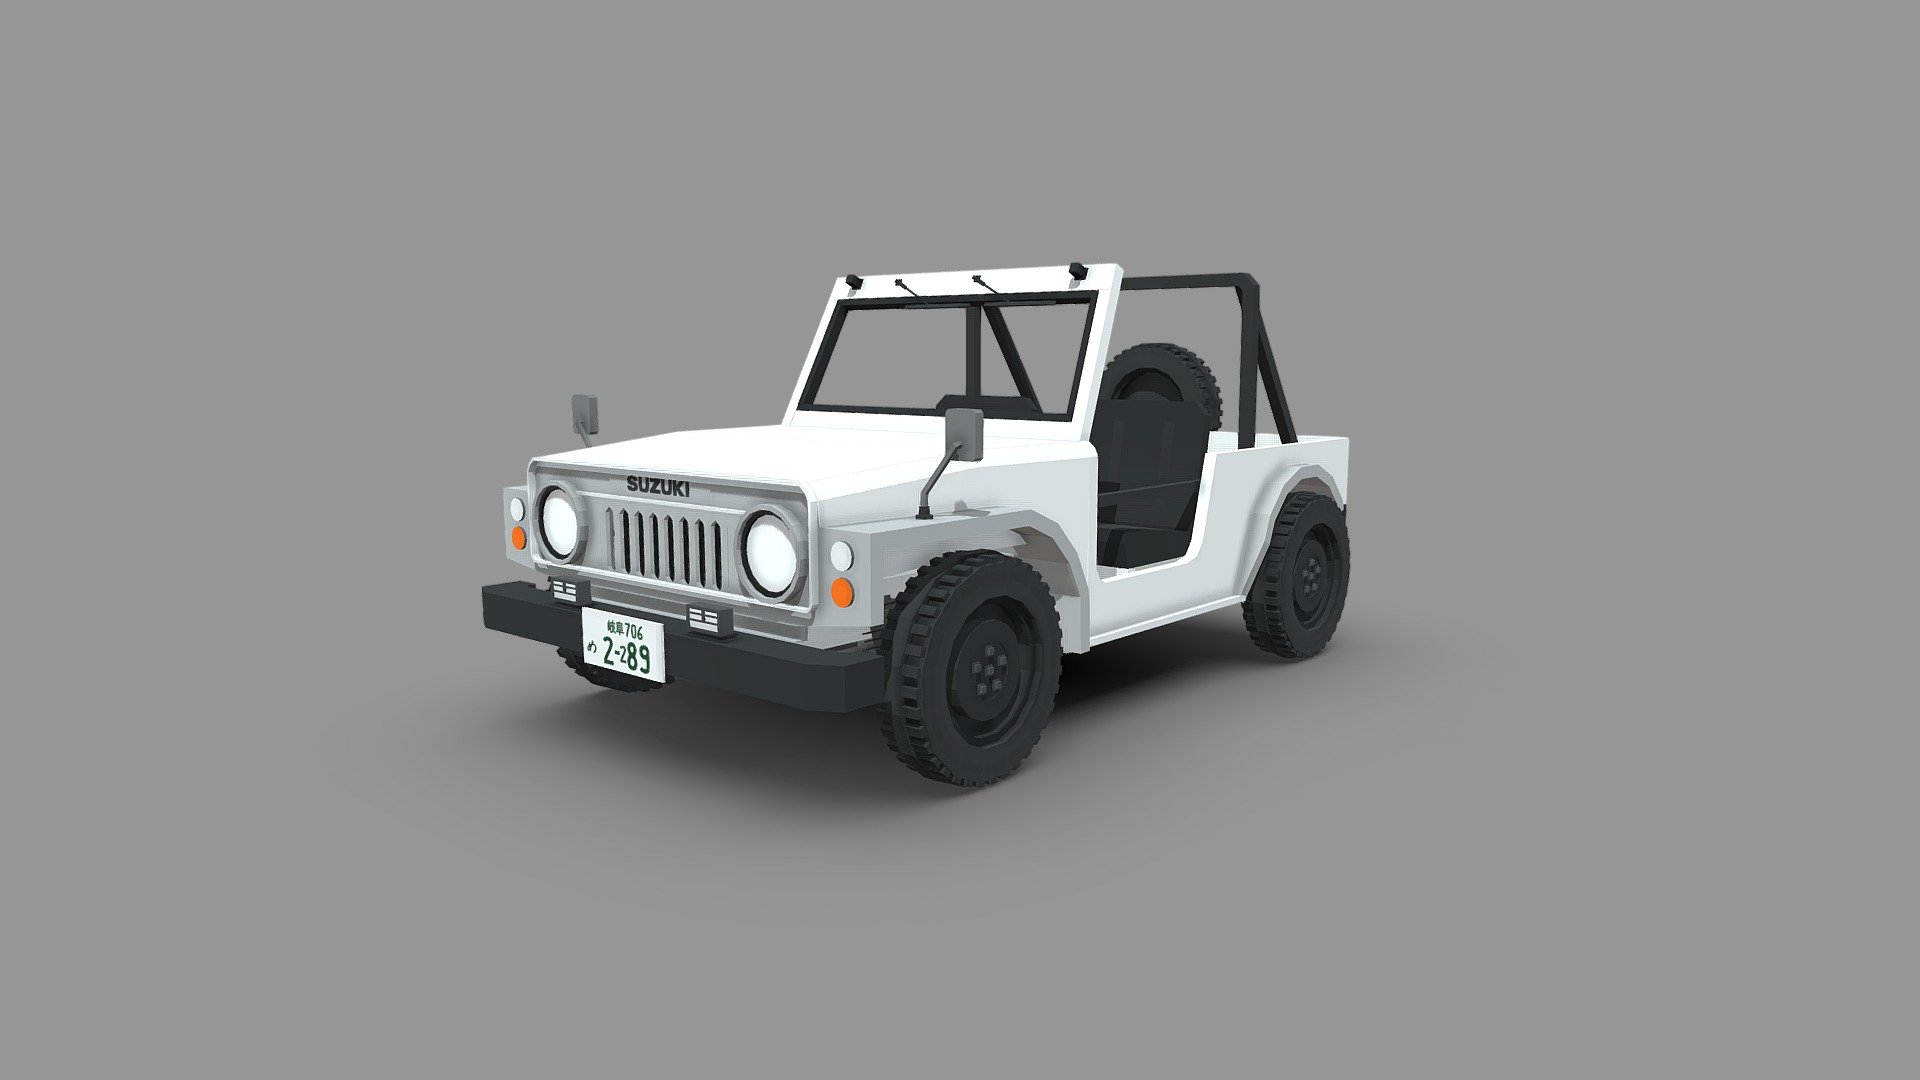 A replica model of the Suzuki Jimny 55/SJ10 for Minecraft: Bedrock Edition (MCBE) made using my phone due to laptop issues. To be used in my MCBE addon as a working model. Will be posted to MCPEDL and Duckcrumbs 3d model